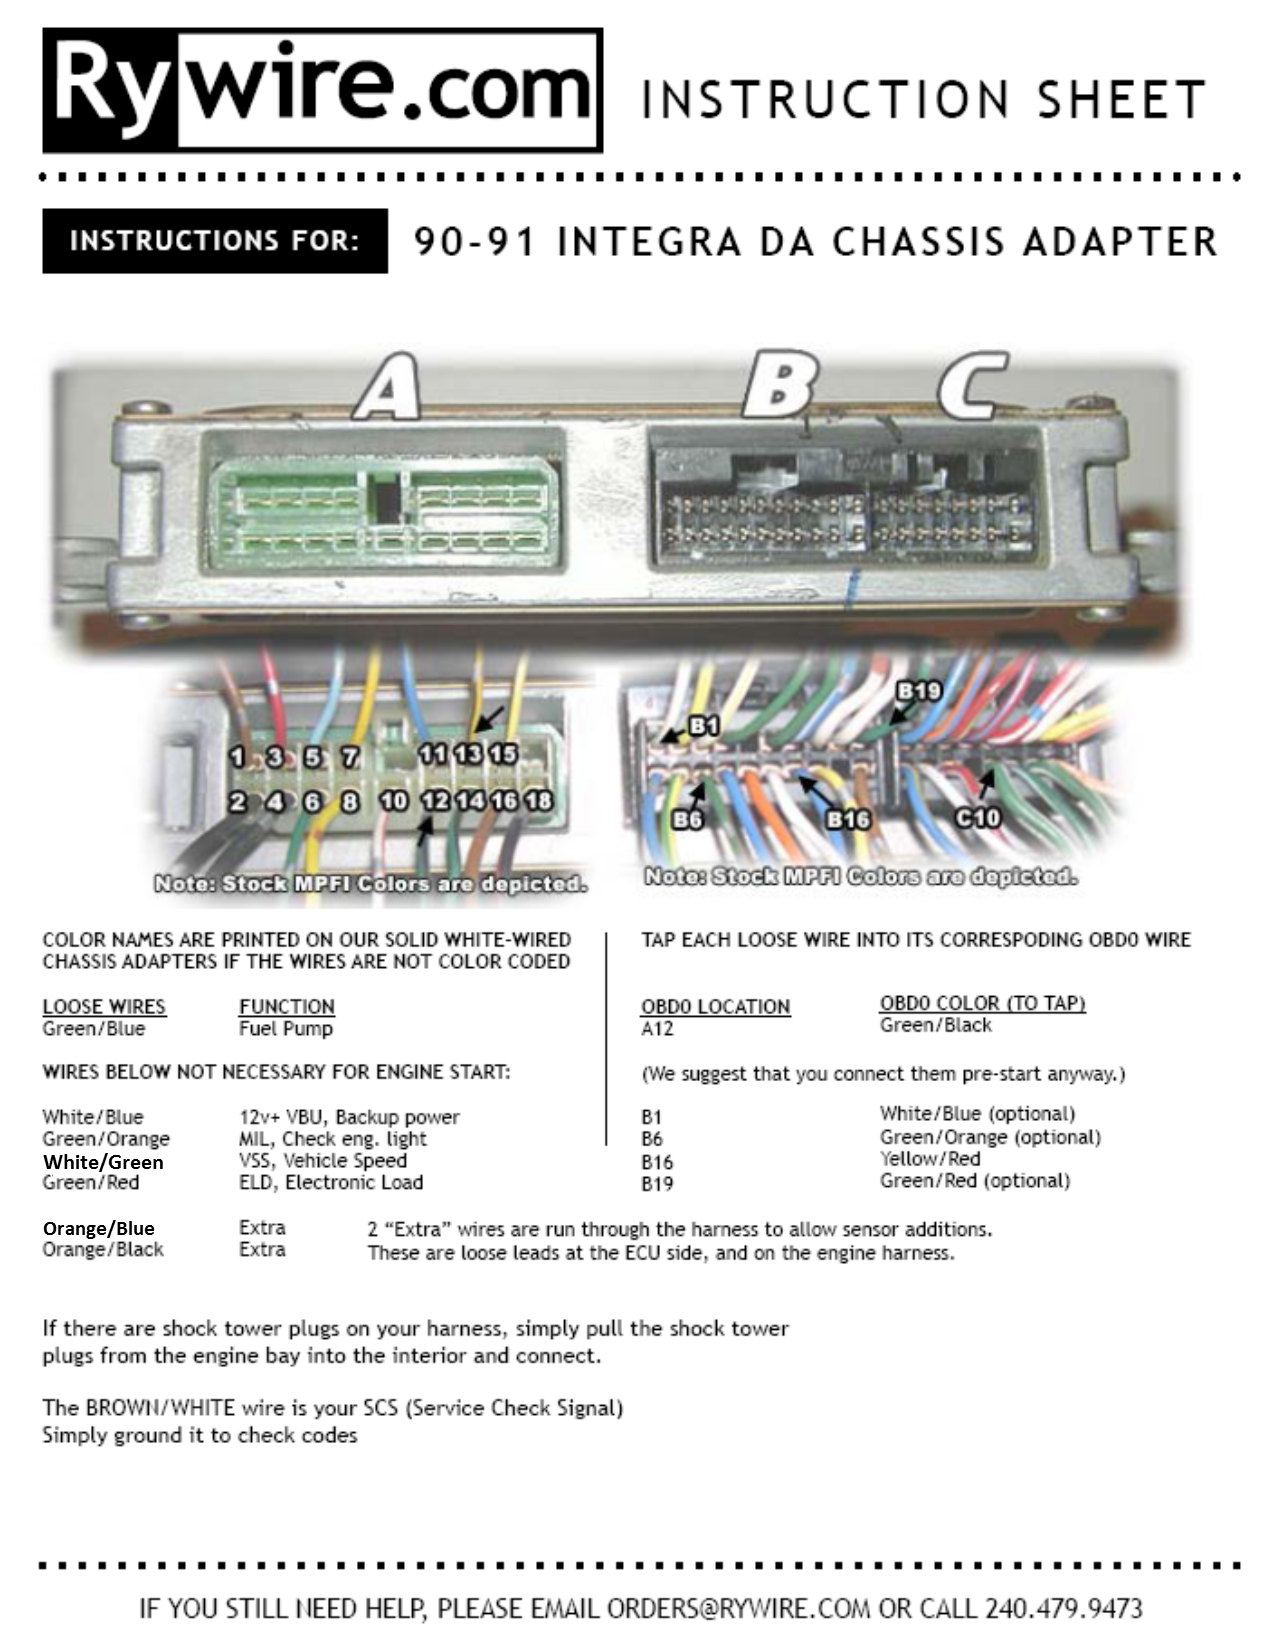 Rywire_Instructions_90-91-DA-Chassis-adapter